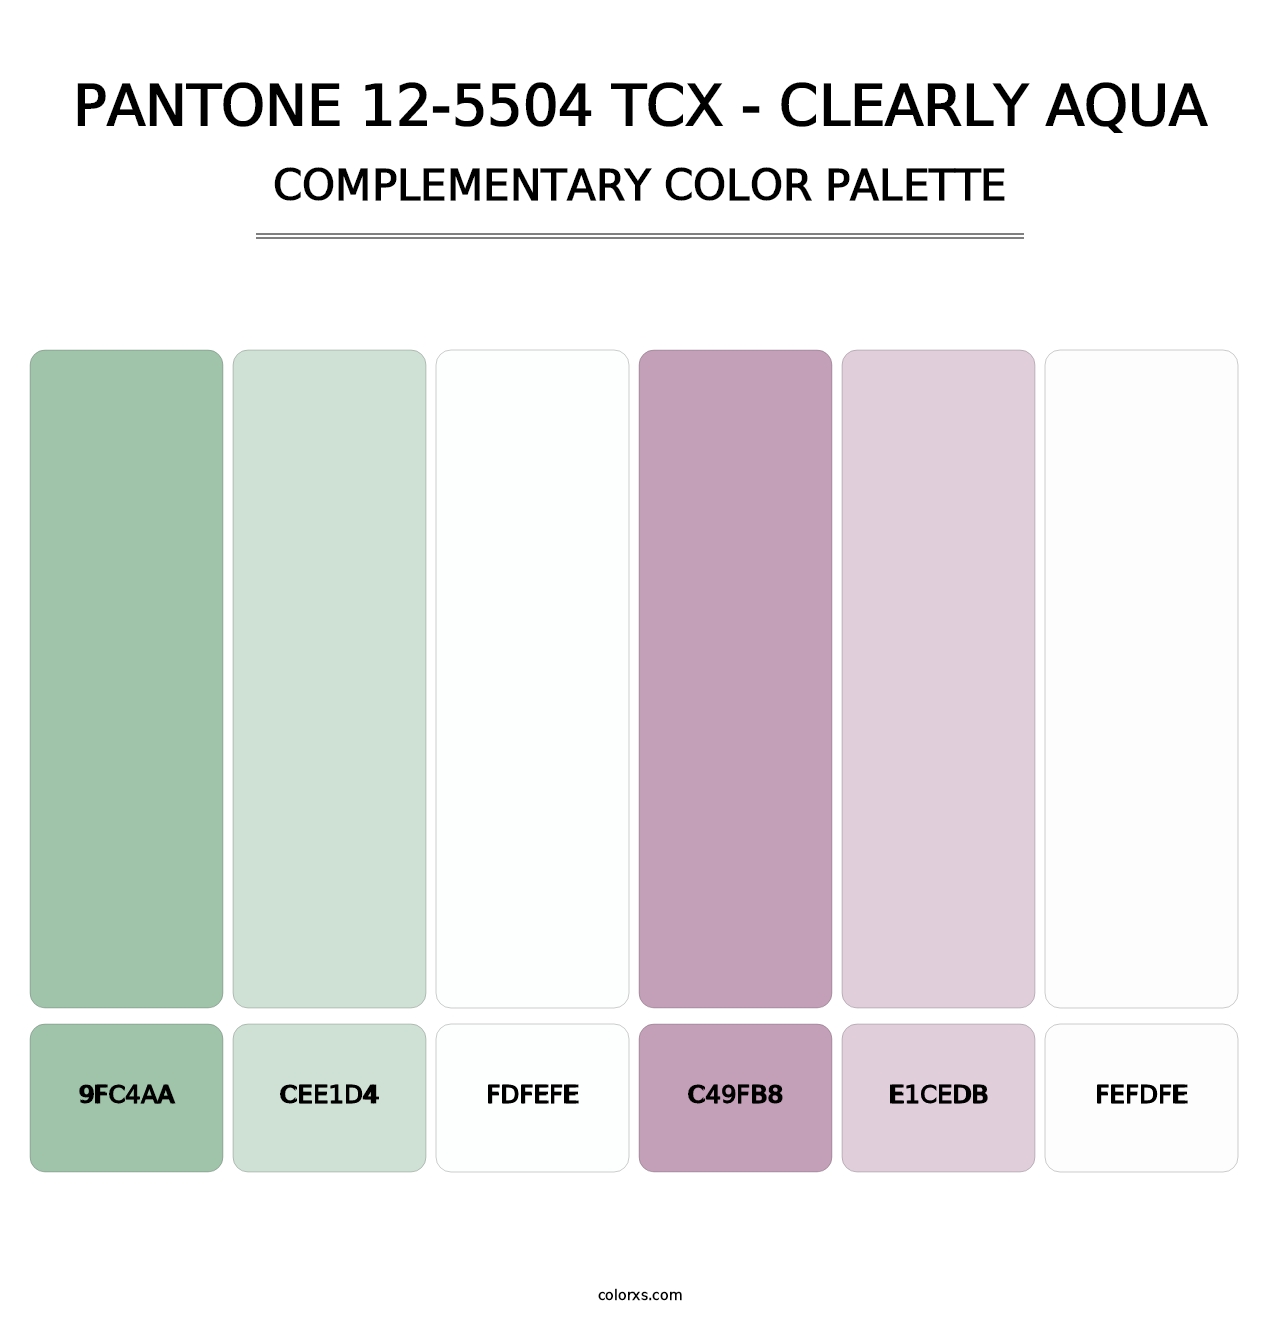 PANTONE 12-5504 TCX - Clearly Aqua - Complementary Color Palette